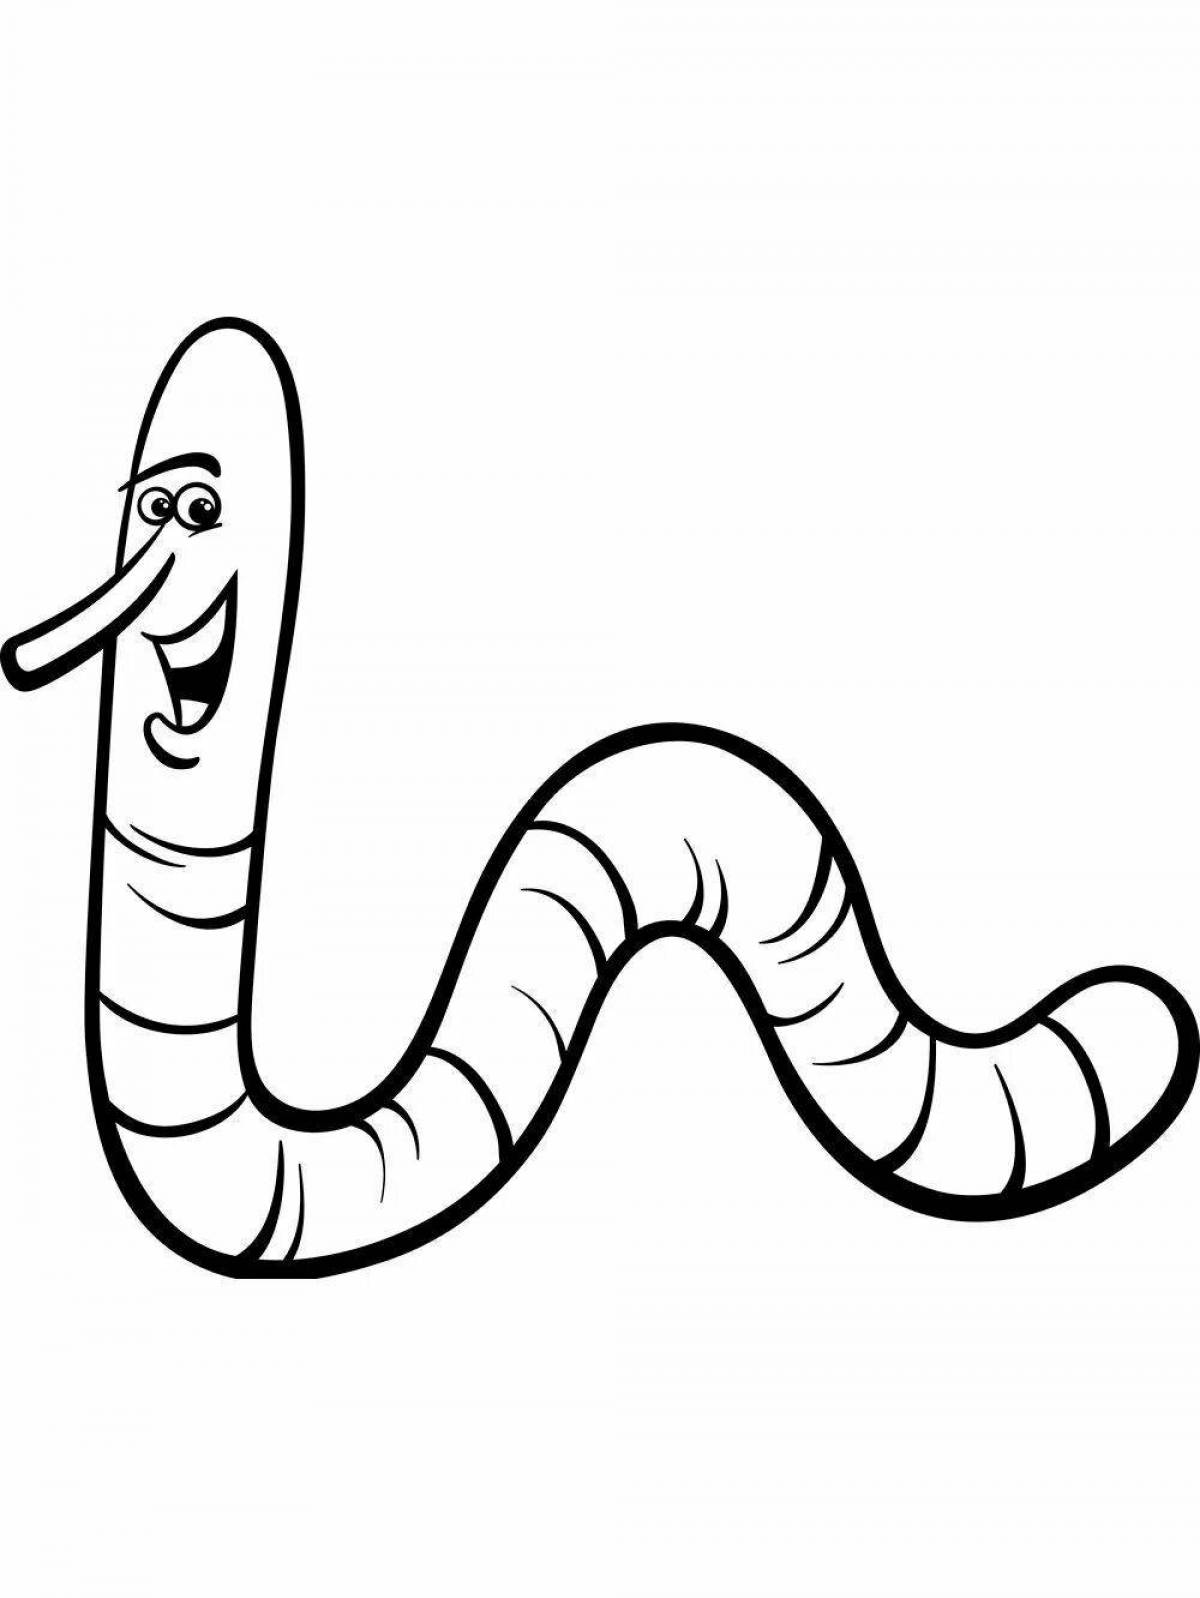 Worm for kids #10